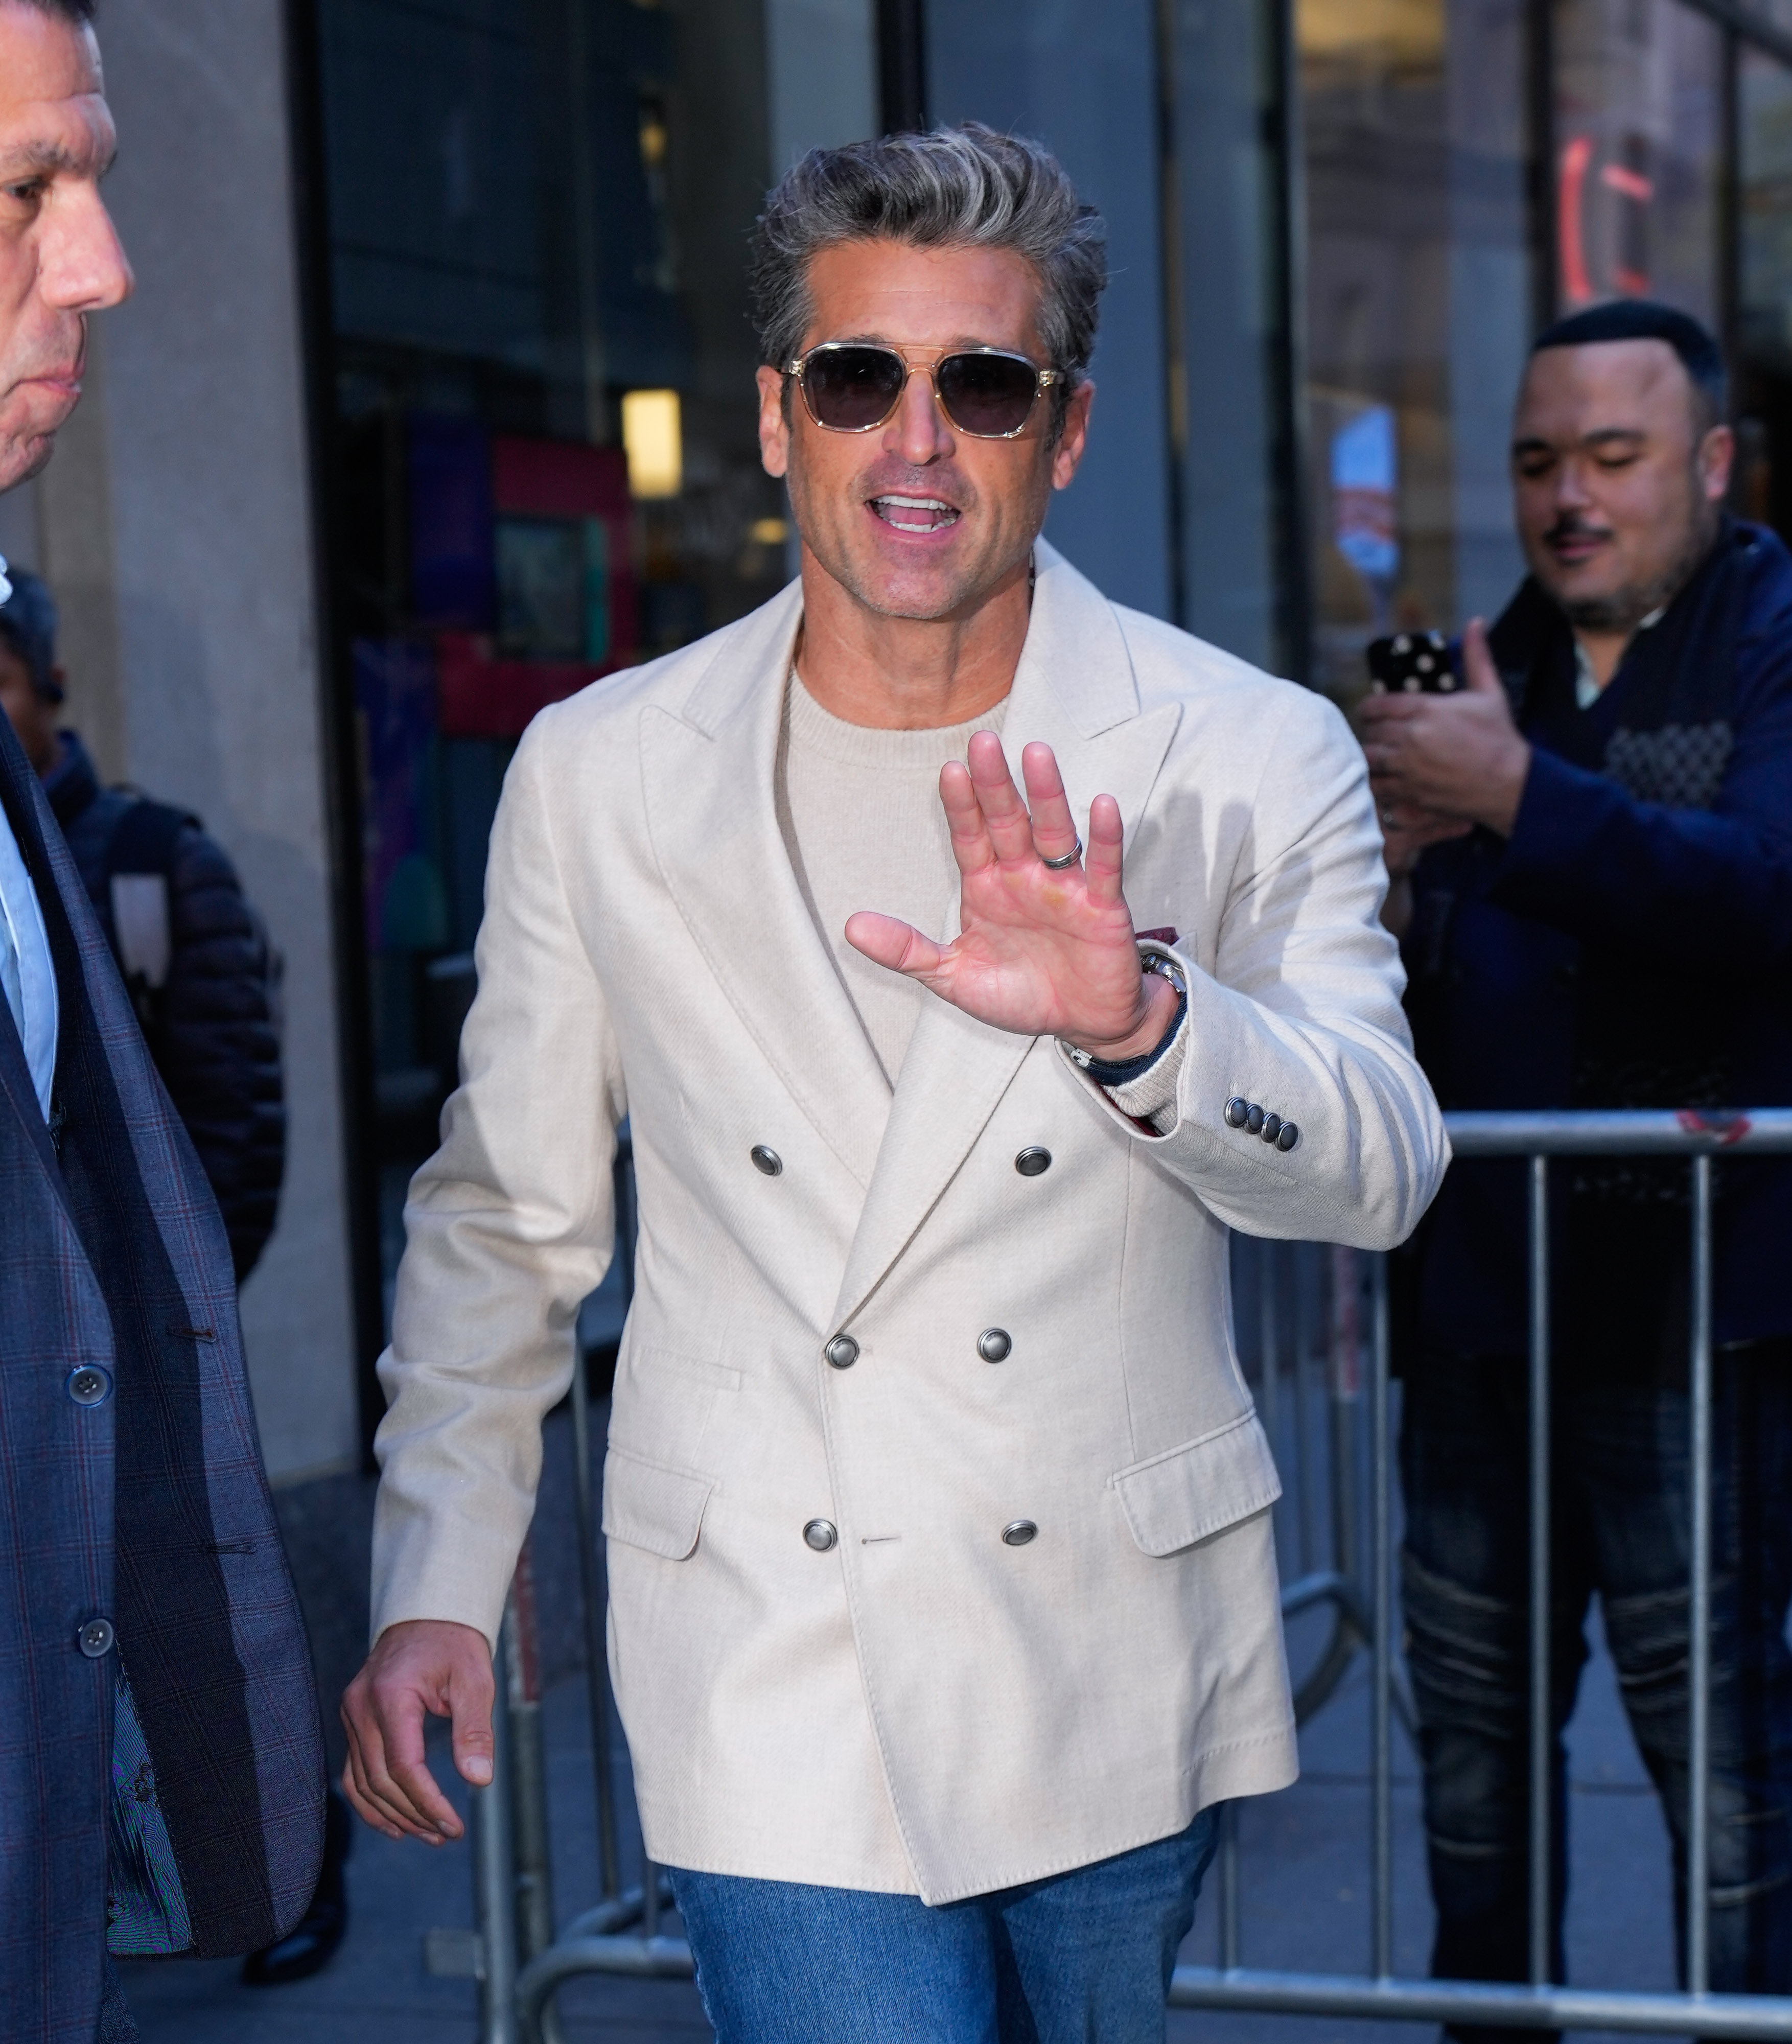 Patrick Dempsey at NBC Studios in New York City on November 14, 2023 | Source: Getty Images